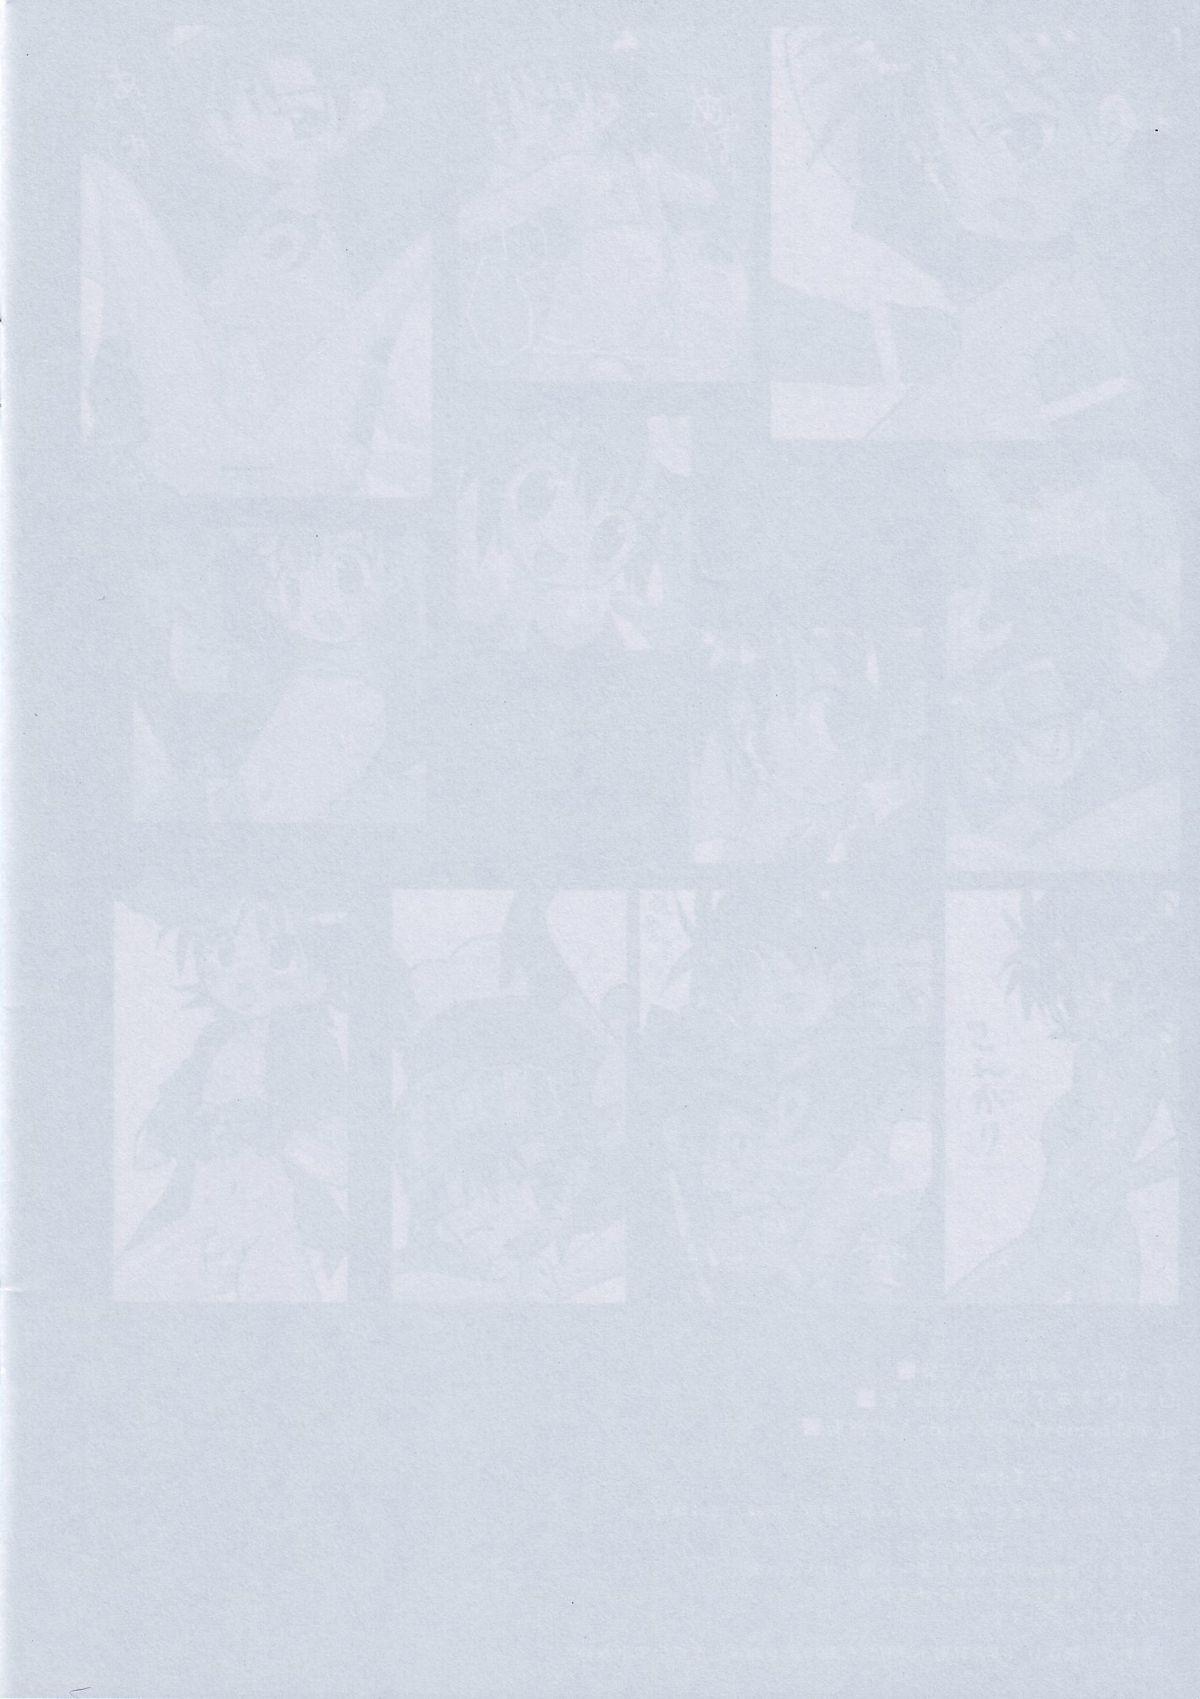 Bribe Digimon Adventure All Series Heroes - Digimon adventure Kissing - Page 21